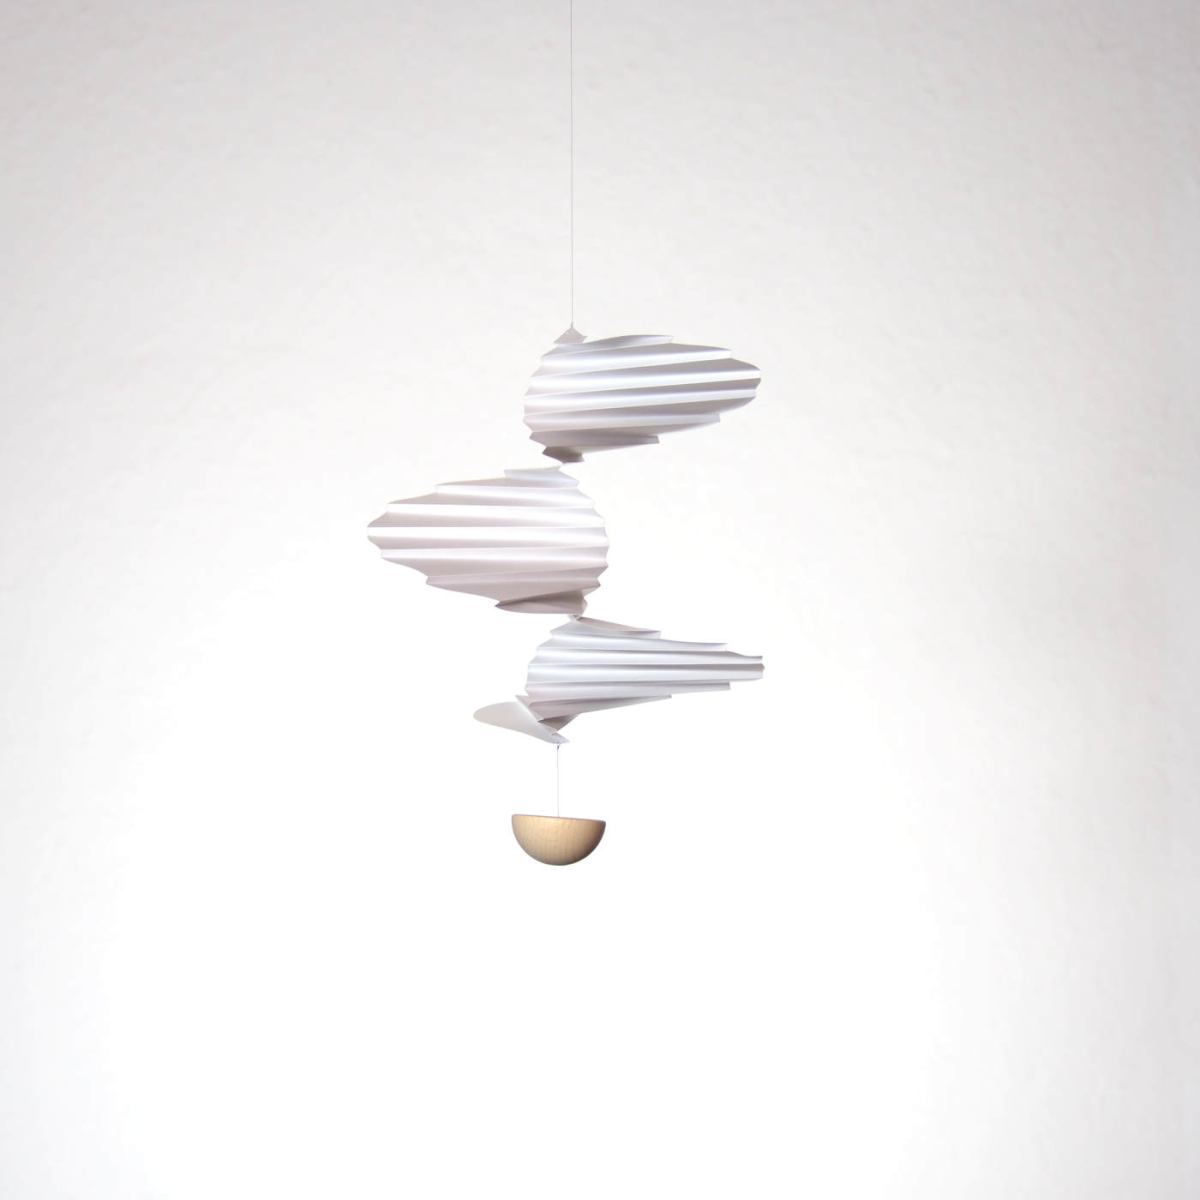 Stairs-like Folded Art Mobile "Airflow" (Three Sizes)